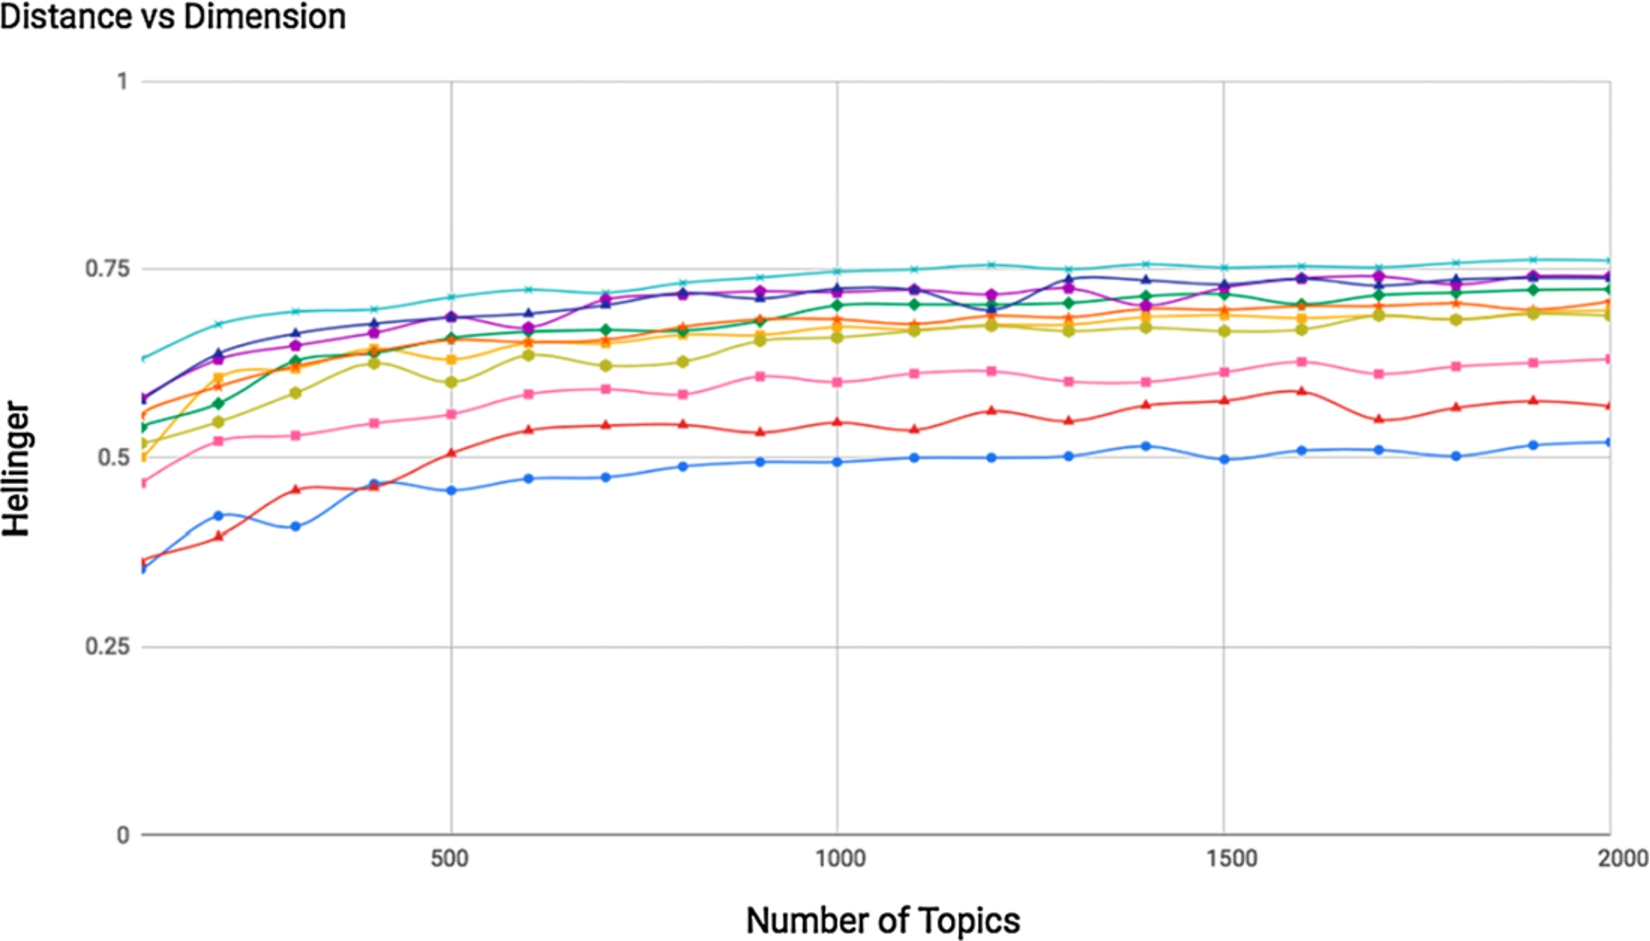 Distance values based on He-divergence between 10 pair of documents from topic models with 100-to-2000 dimensions.